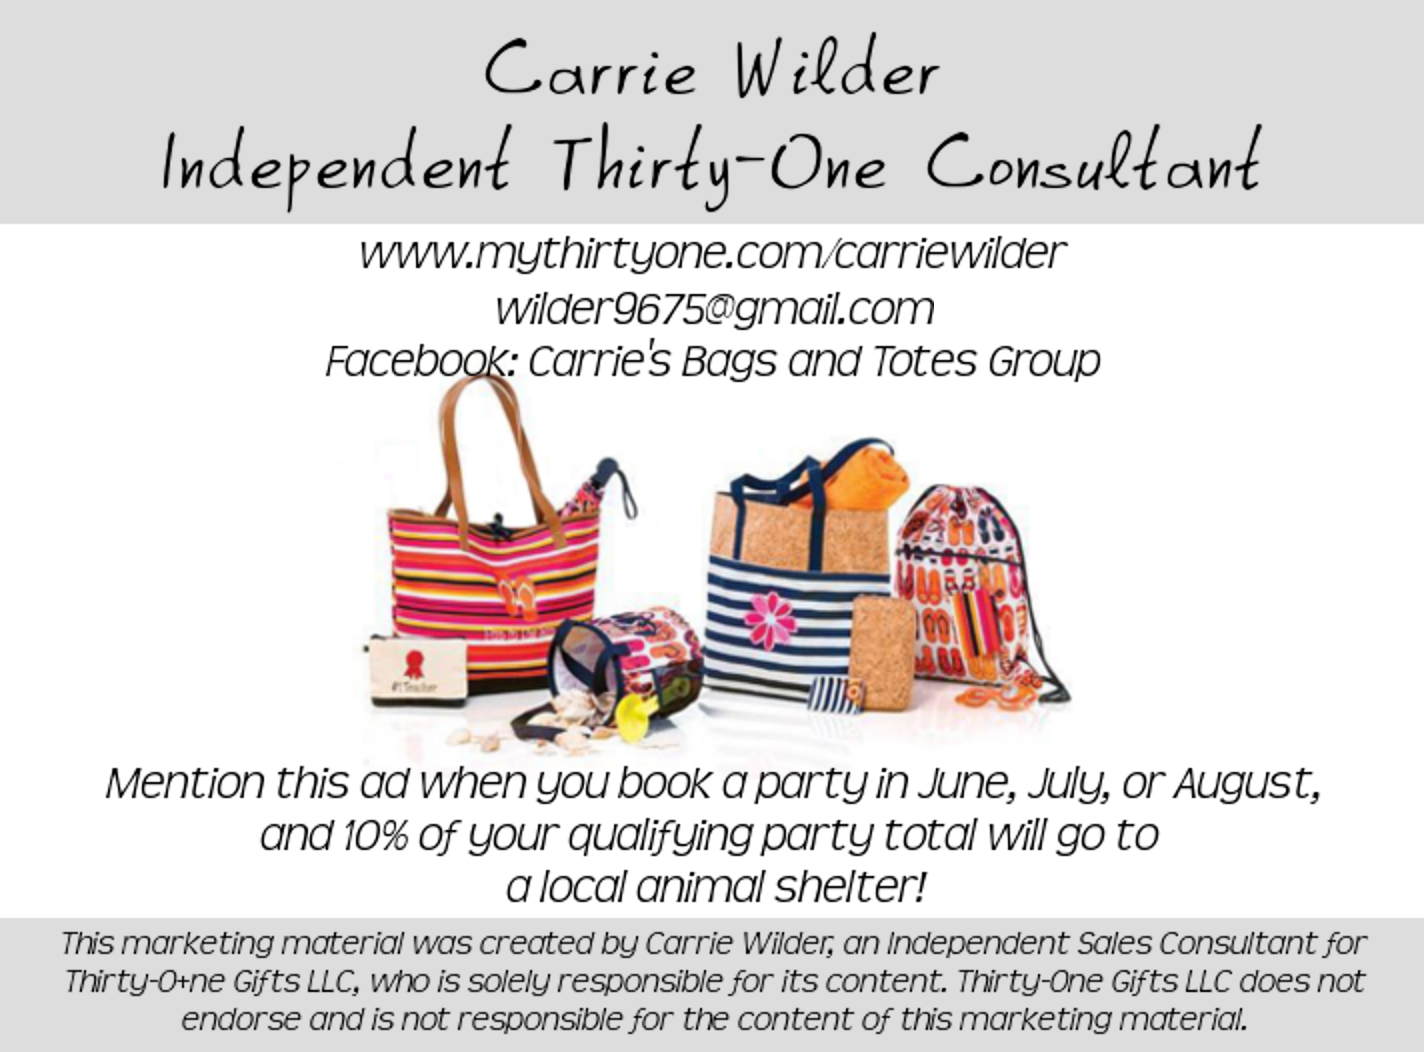 Carrie Wilder, Independent Thirty-One Consultant